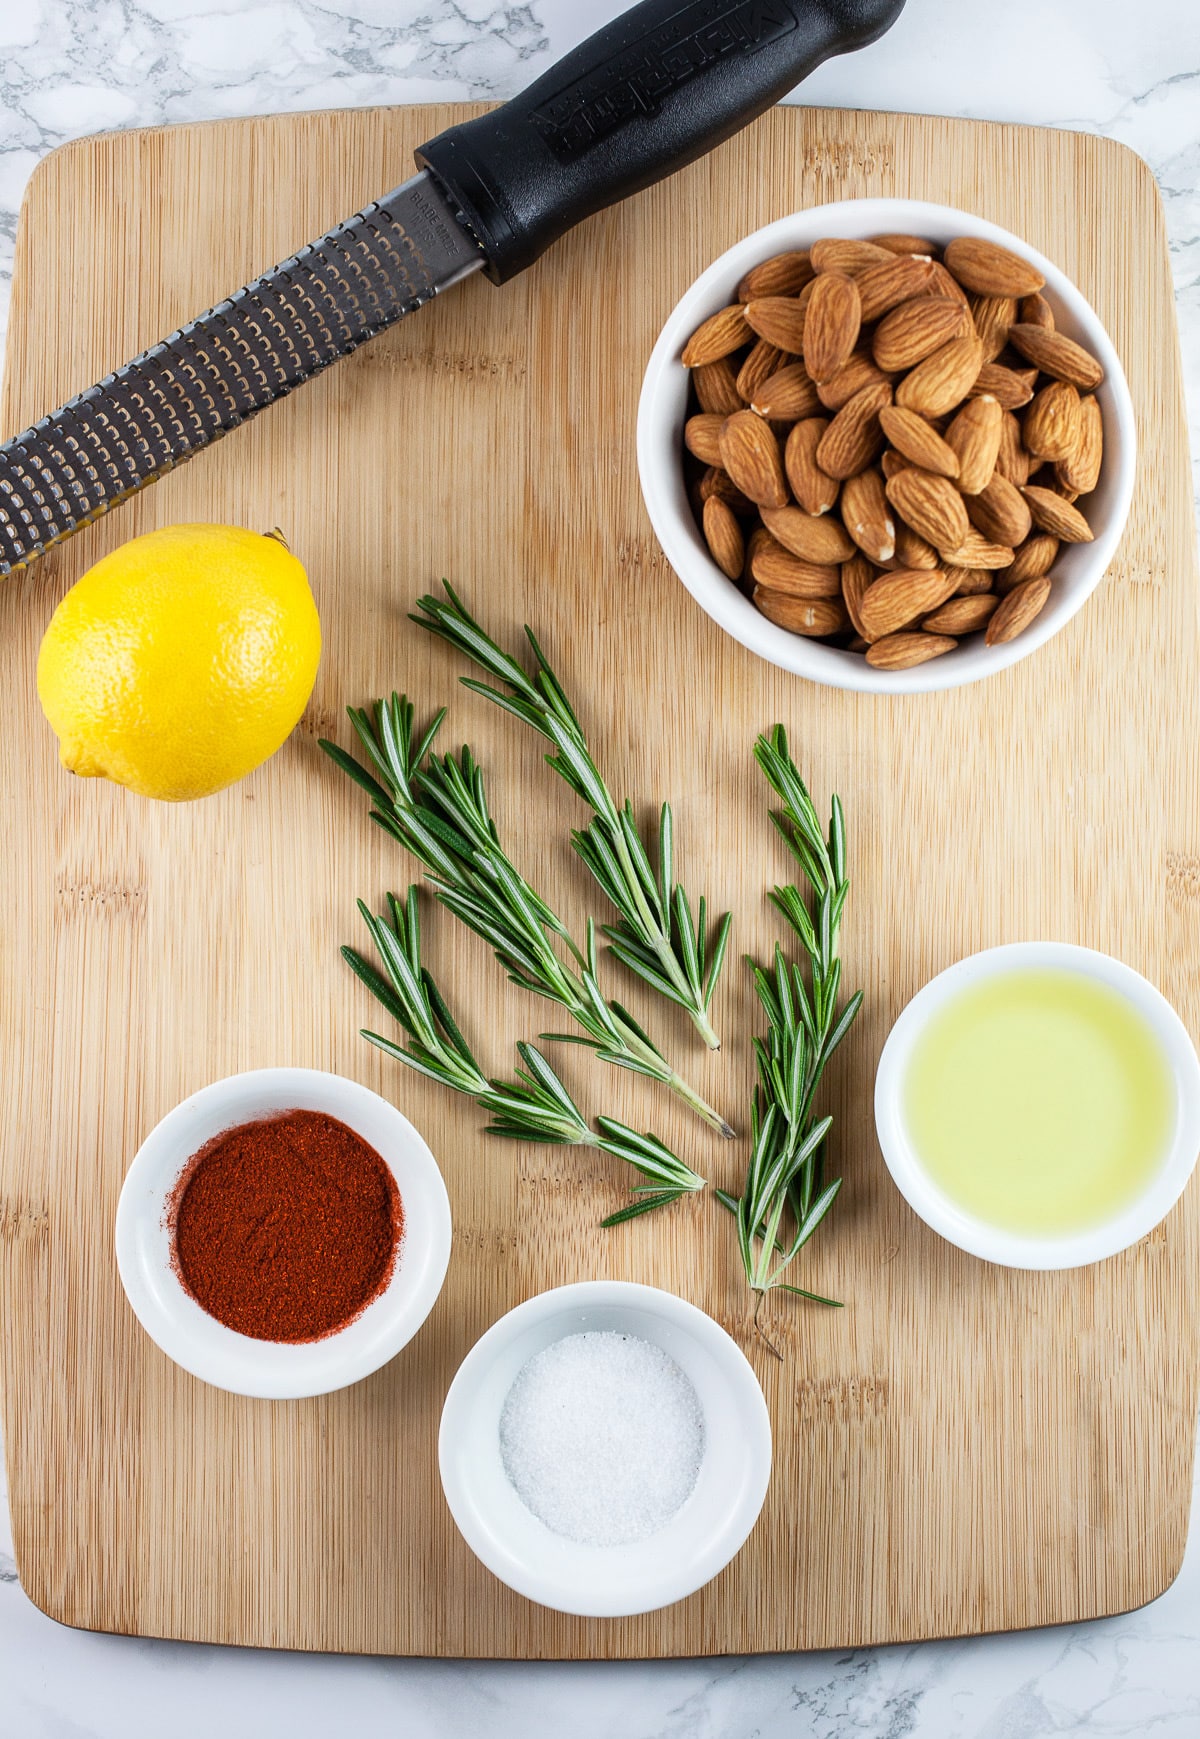 Kosher salt, smoked paprika, olive oil, fresh rosemary, lemon, almonds, and Microplane zester on wooden cutting board.